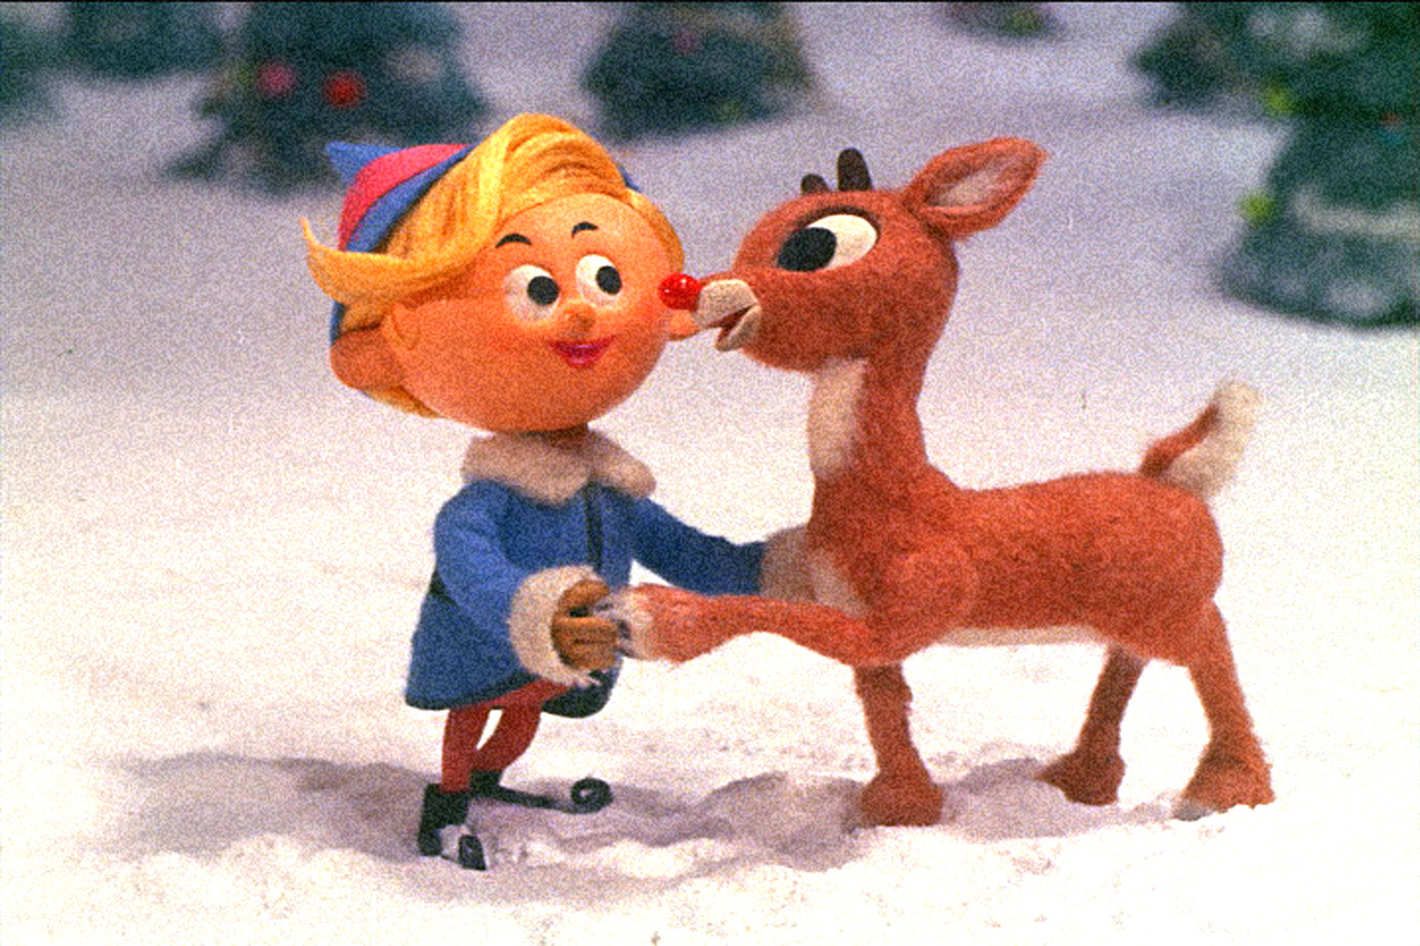 Rudolph with that ass so tight